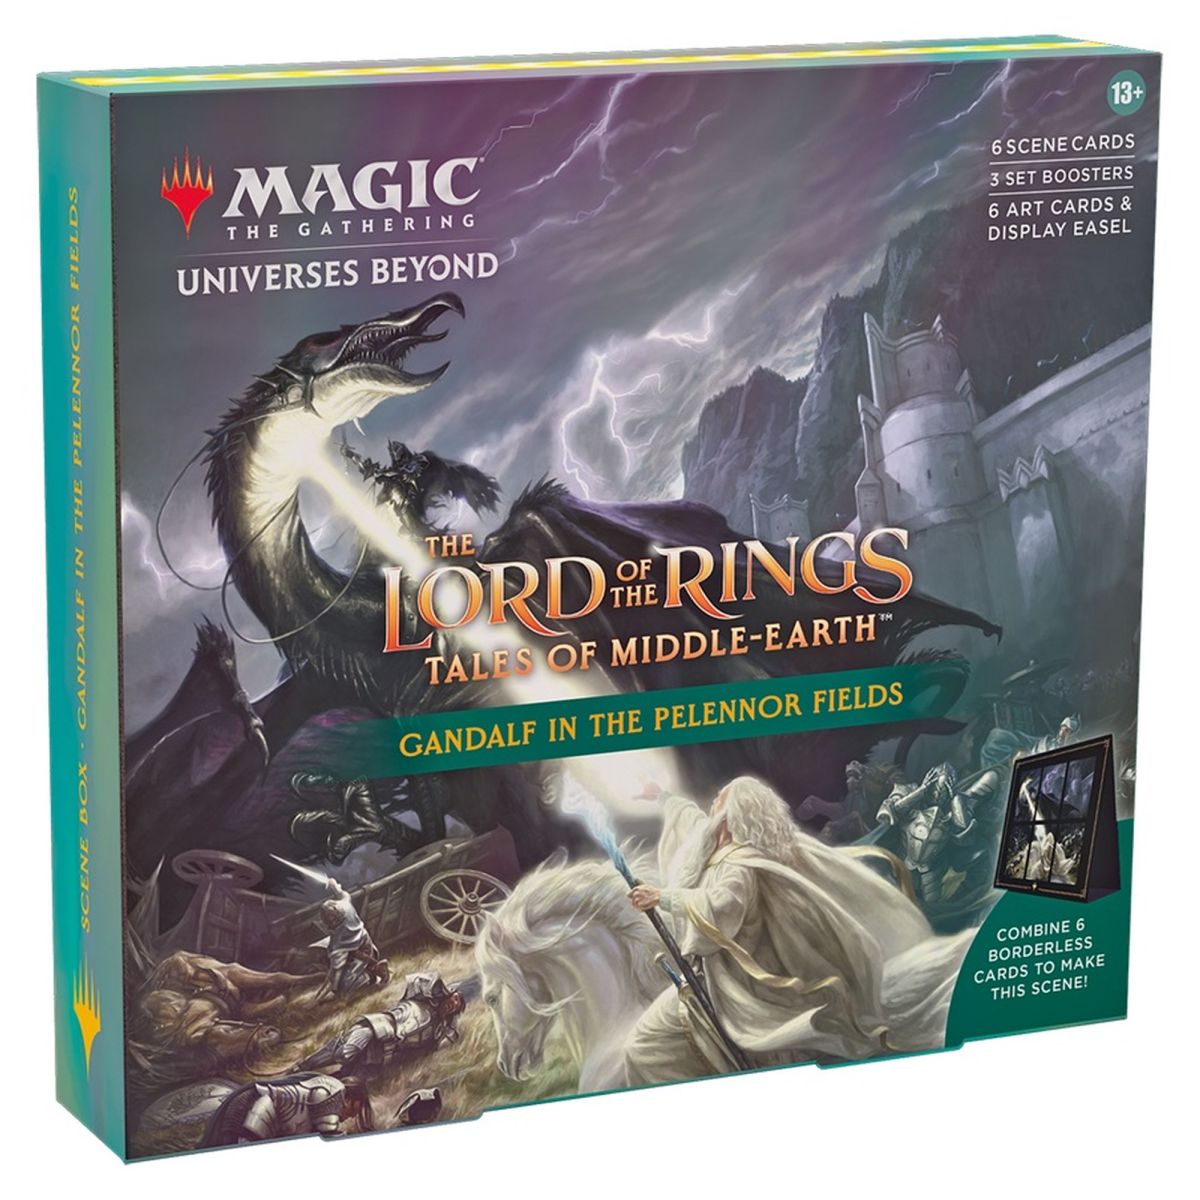 Magic The Gathering - Scene Box - The Lord of the Rings: Tales of Middle-earth - Gandalf in the Pelennor Fields  - EN